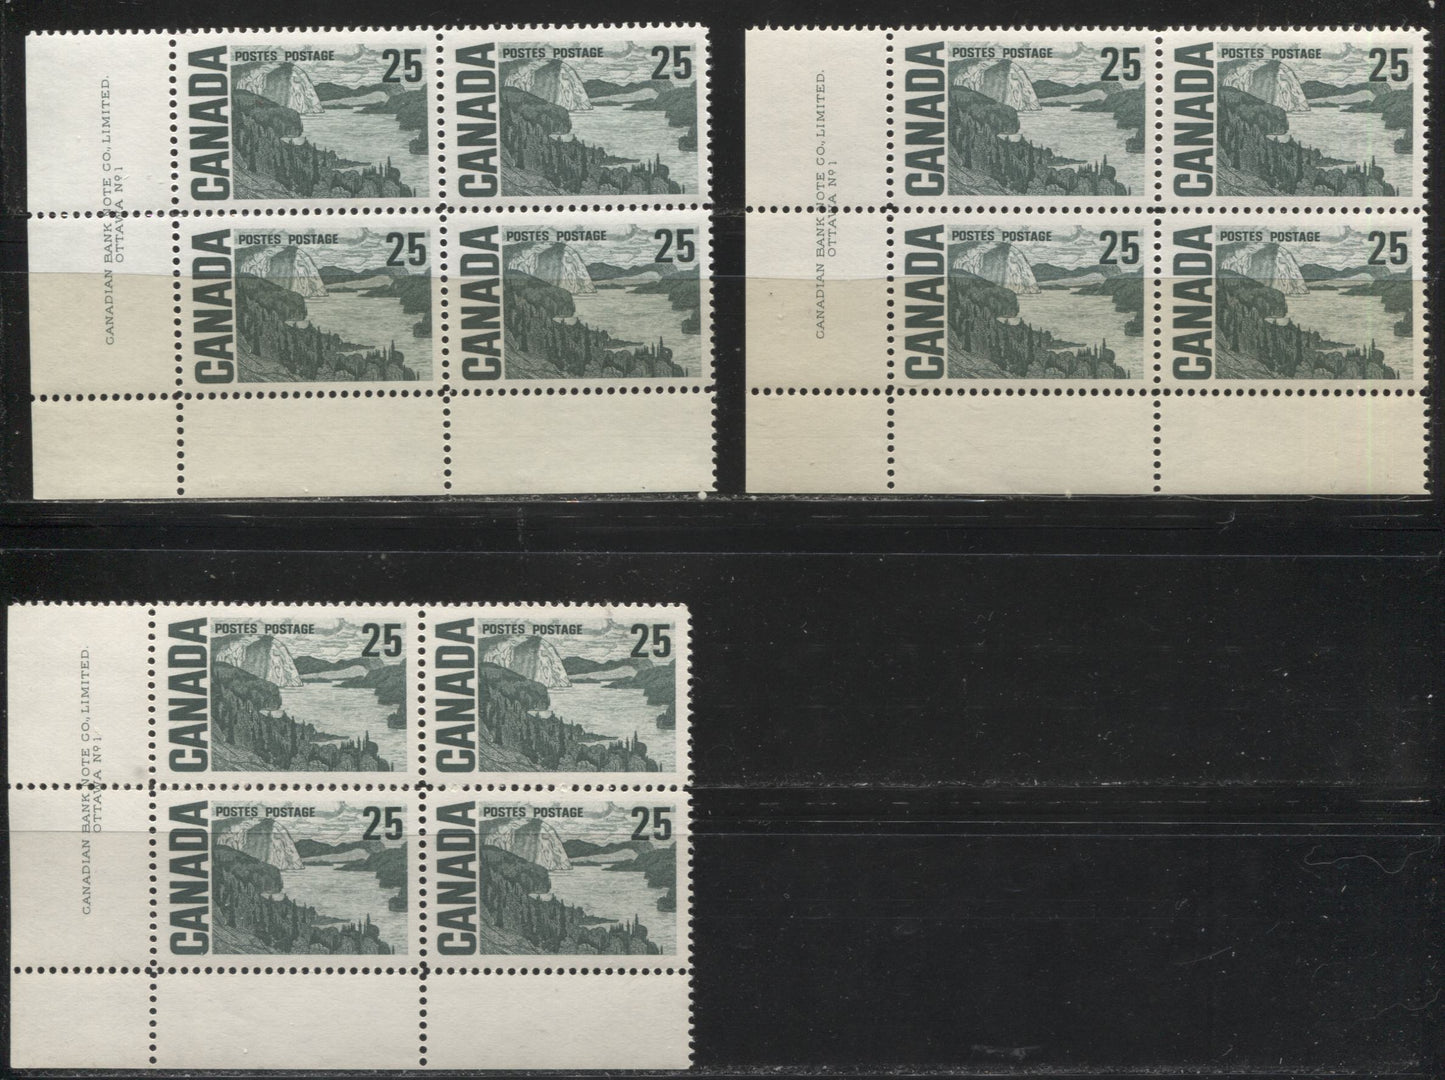 Lot 3 Canada #465 25c Slate Green Solemn Land, 1967-1973 Centennial Definitive Issue, Three VFNH LL Plate 1 Blocks of 4 On DF Ivory Paper With Streaky Dex Gum